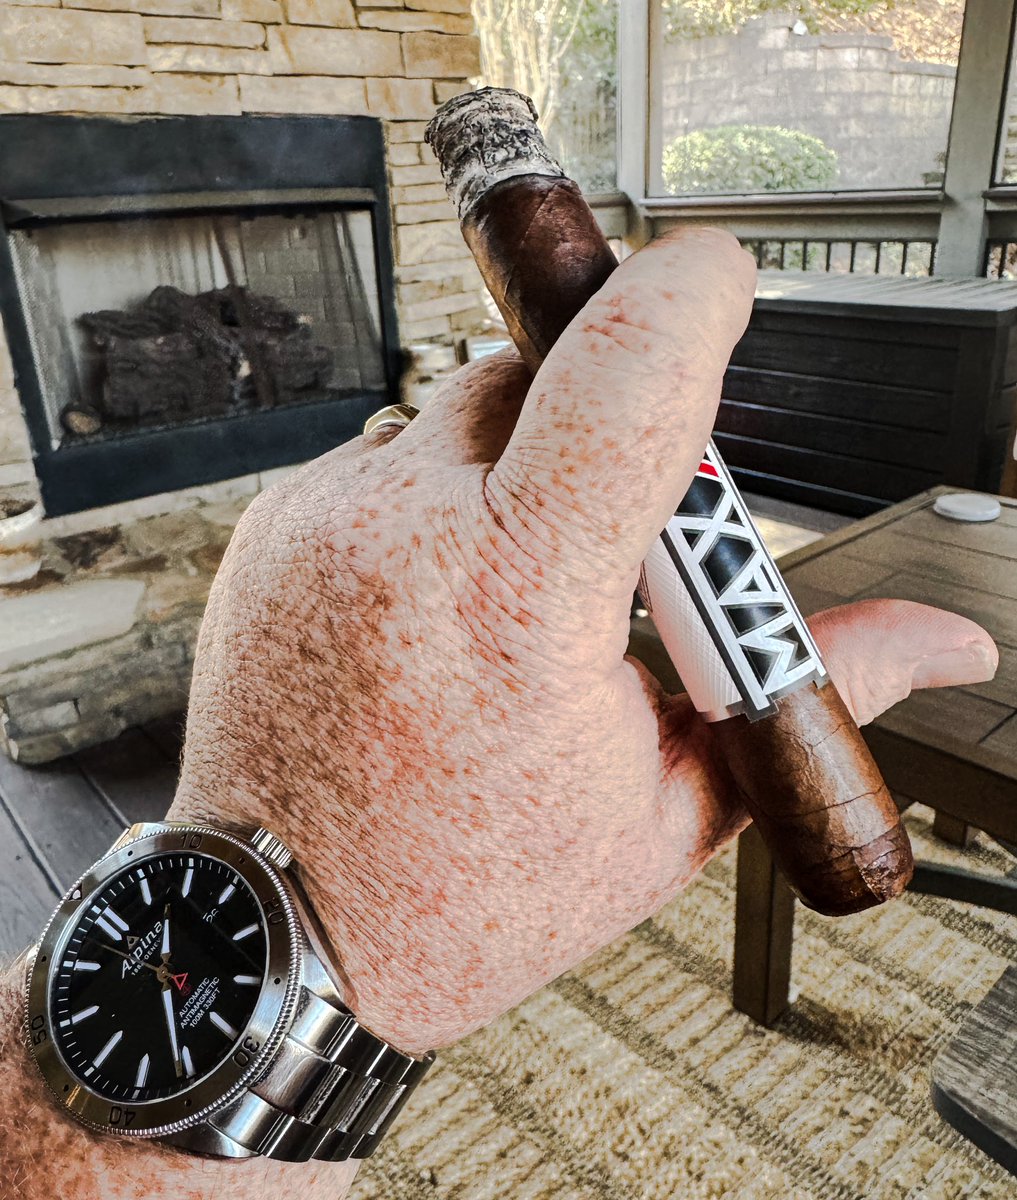 Monday afternoon work…could be worse. @alecbradley #MAXX on a beautiful afternoon. Perfect for a #workfromhome #smoke. Hope everyone else is having a good start to the week! #nowsmoking #CigarLife #BOTL #watchoftheday #Alpina